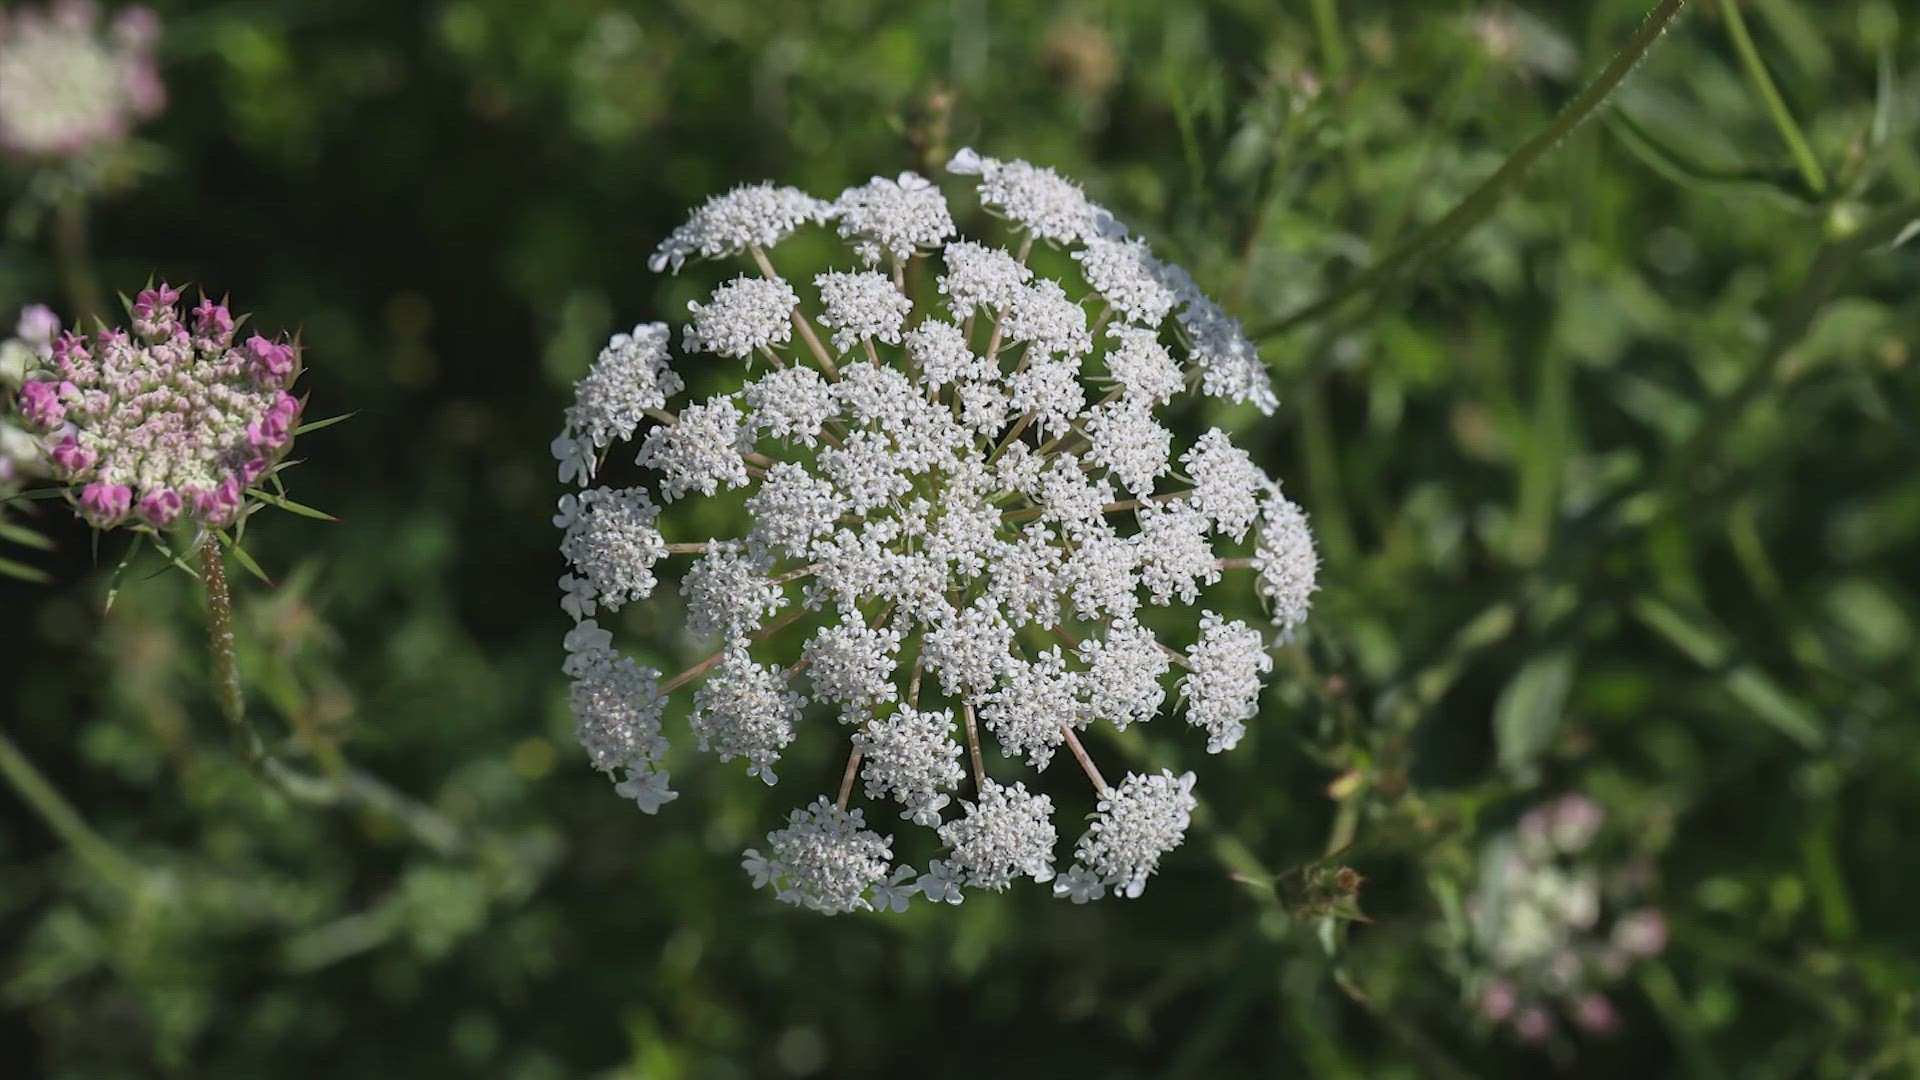 Poison hemlock looks like a harmless flower but it was actually used in ancient Greece for executions.